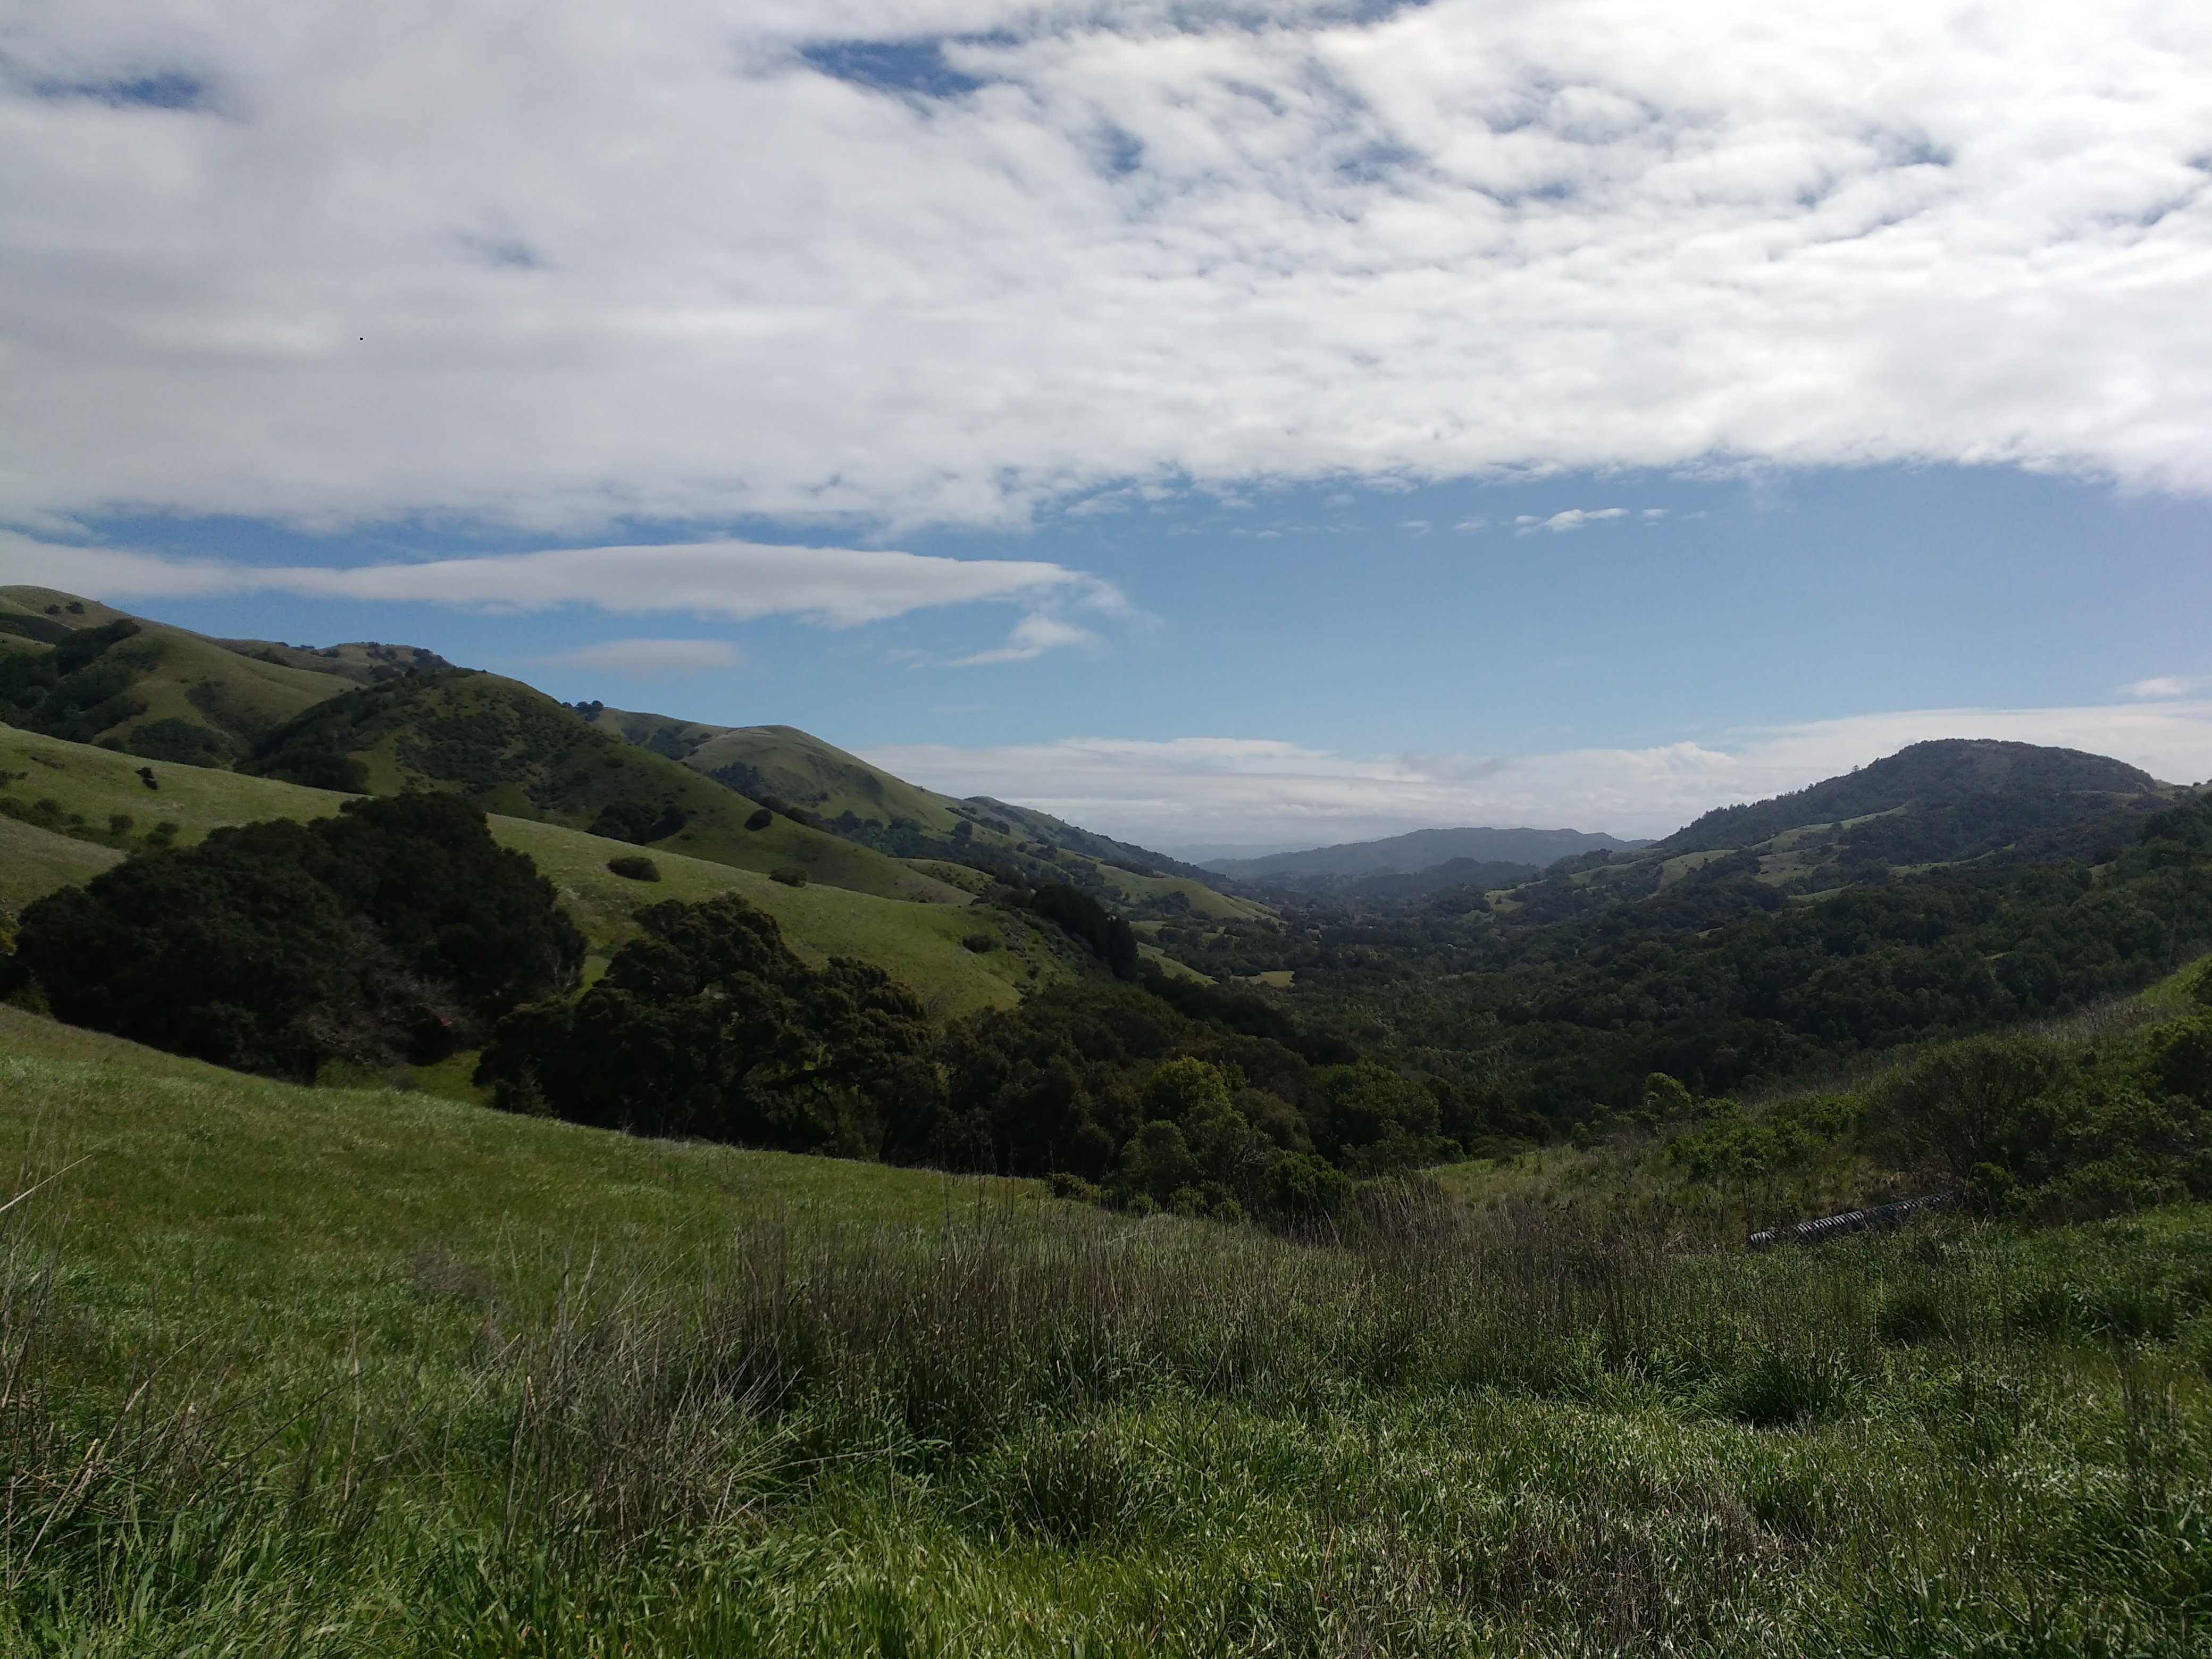 tiny travel chick most memorable travel experience lucas valley preserve view